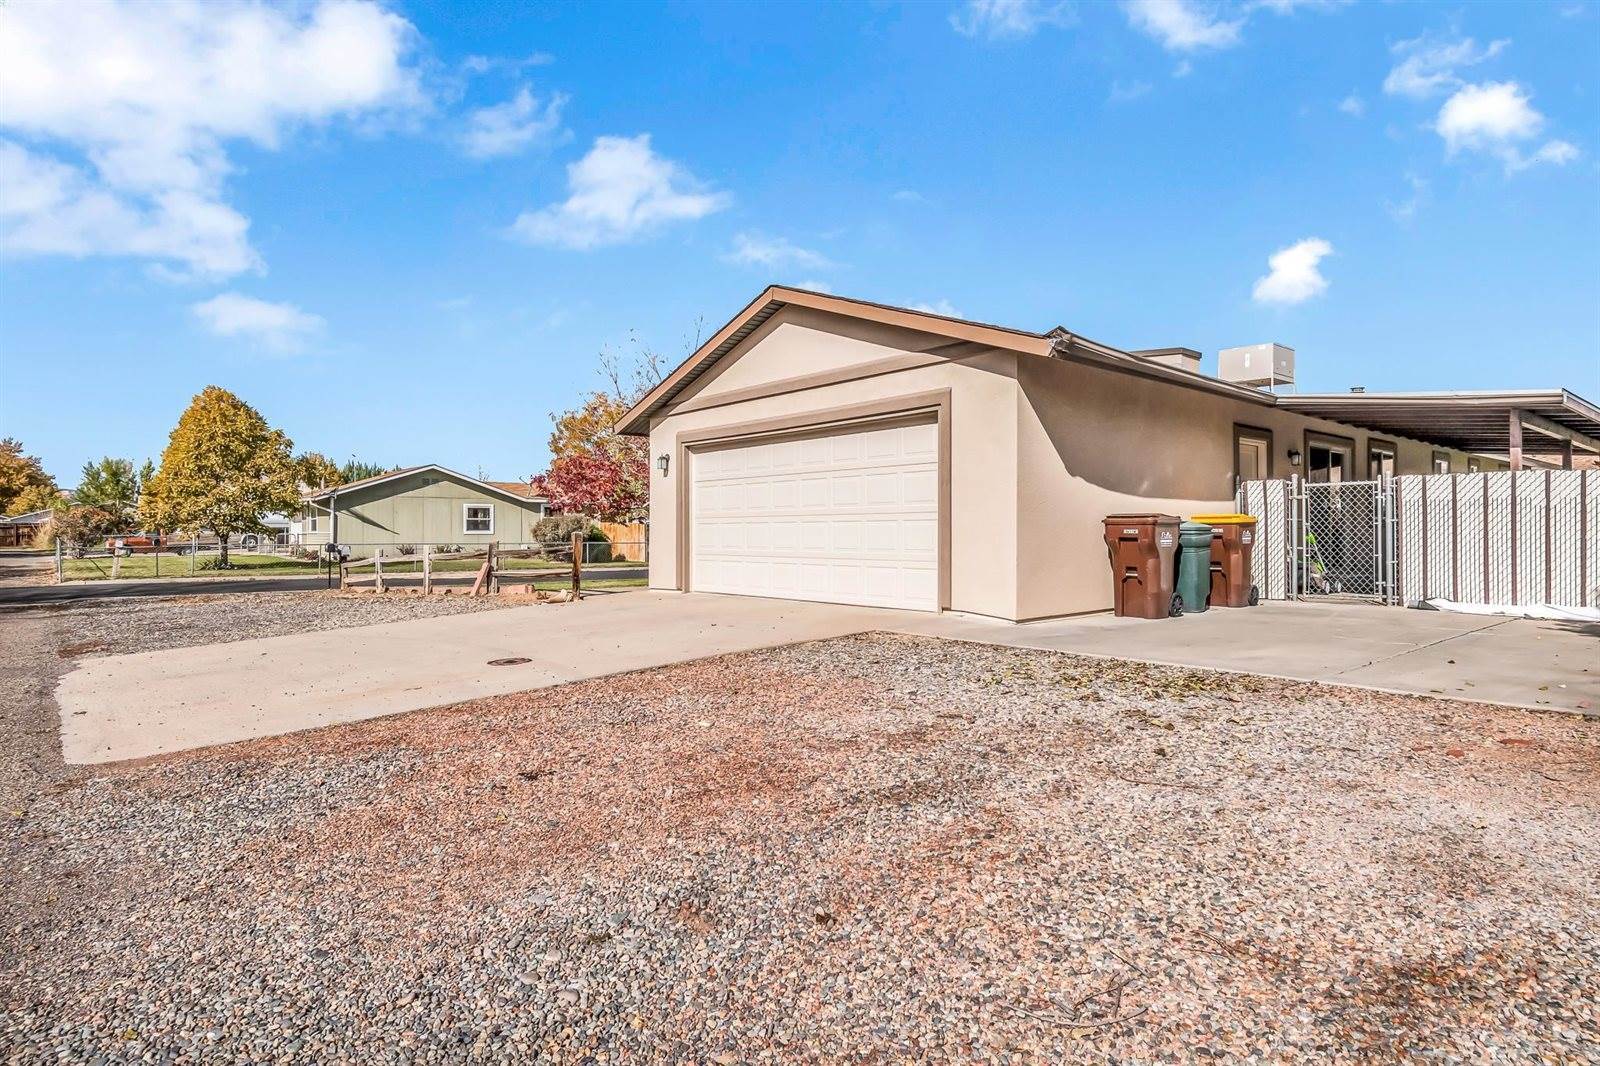 260 28 Road, #A, Grand Junction, CO 81503